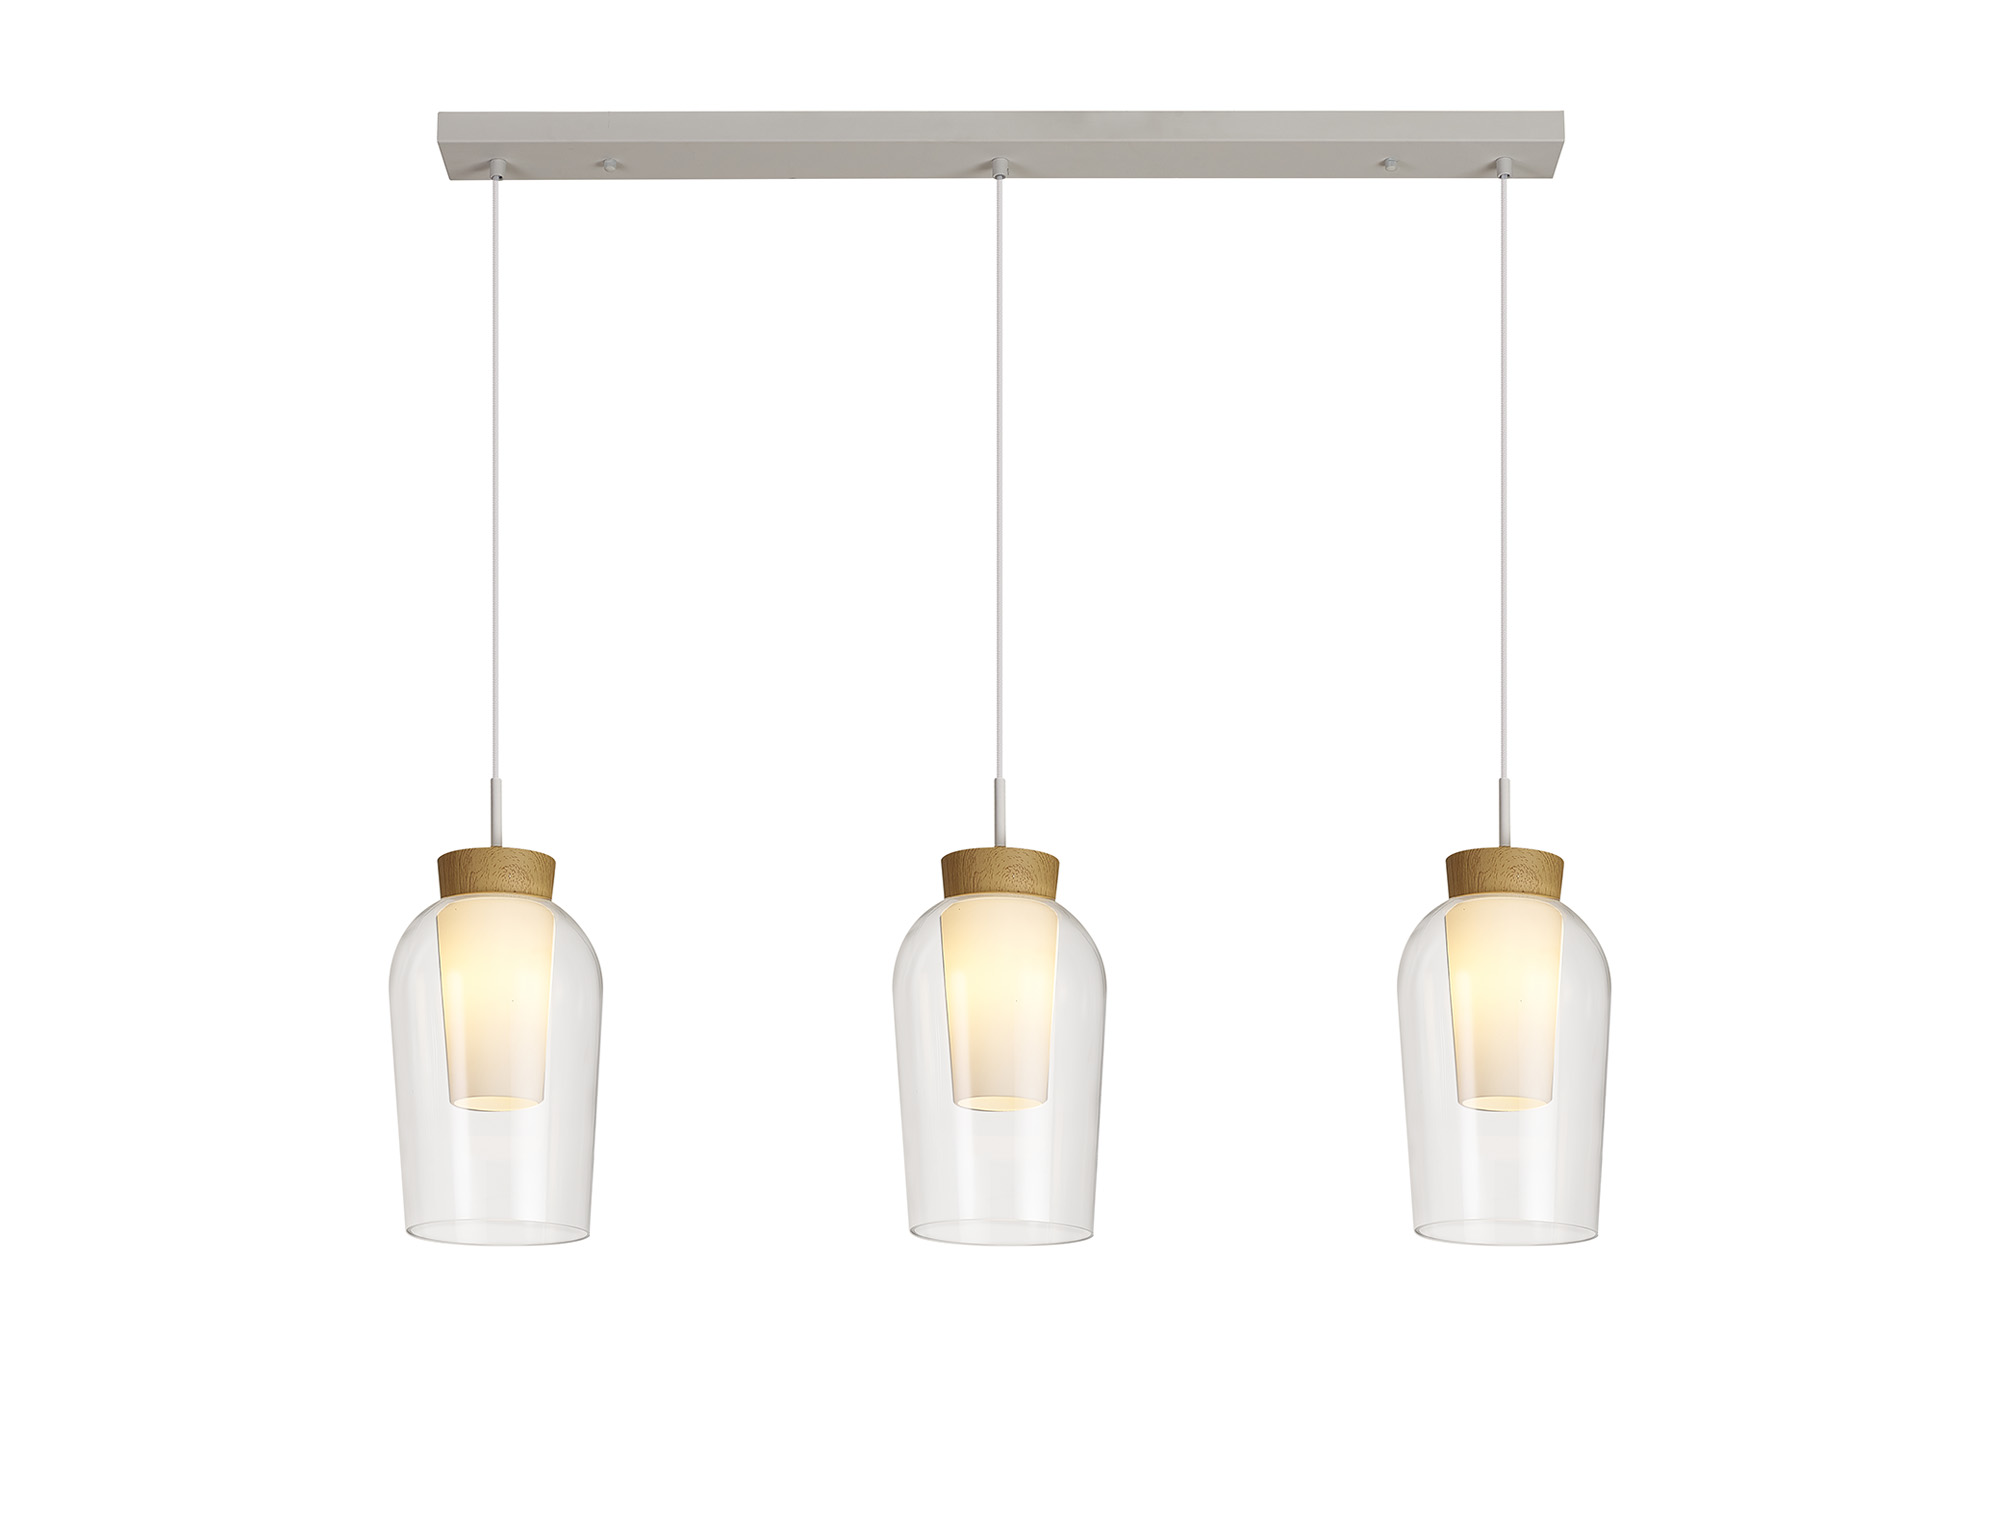 Nora White Ceiling Lights Mantra Linear Fittings